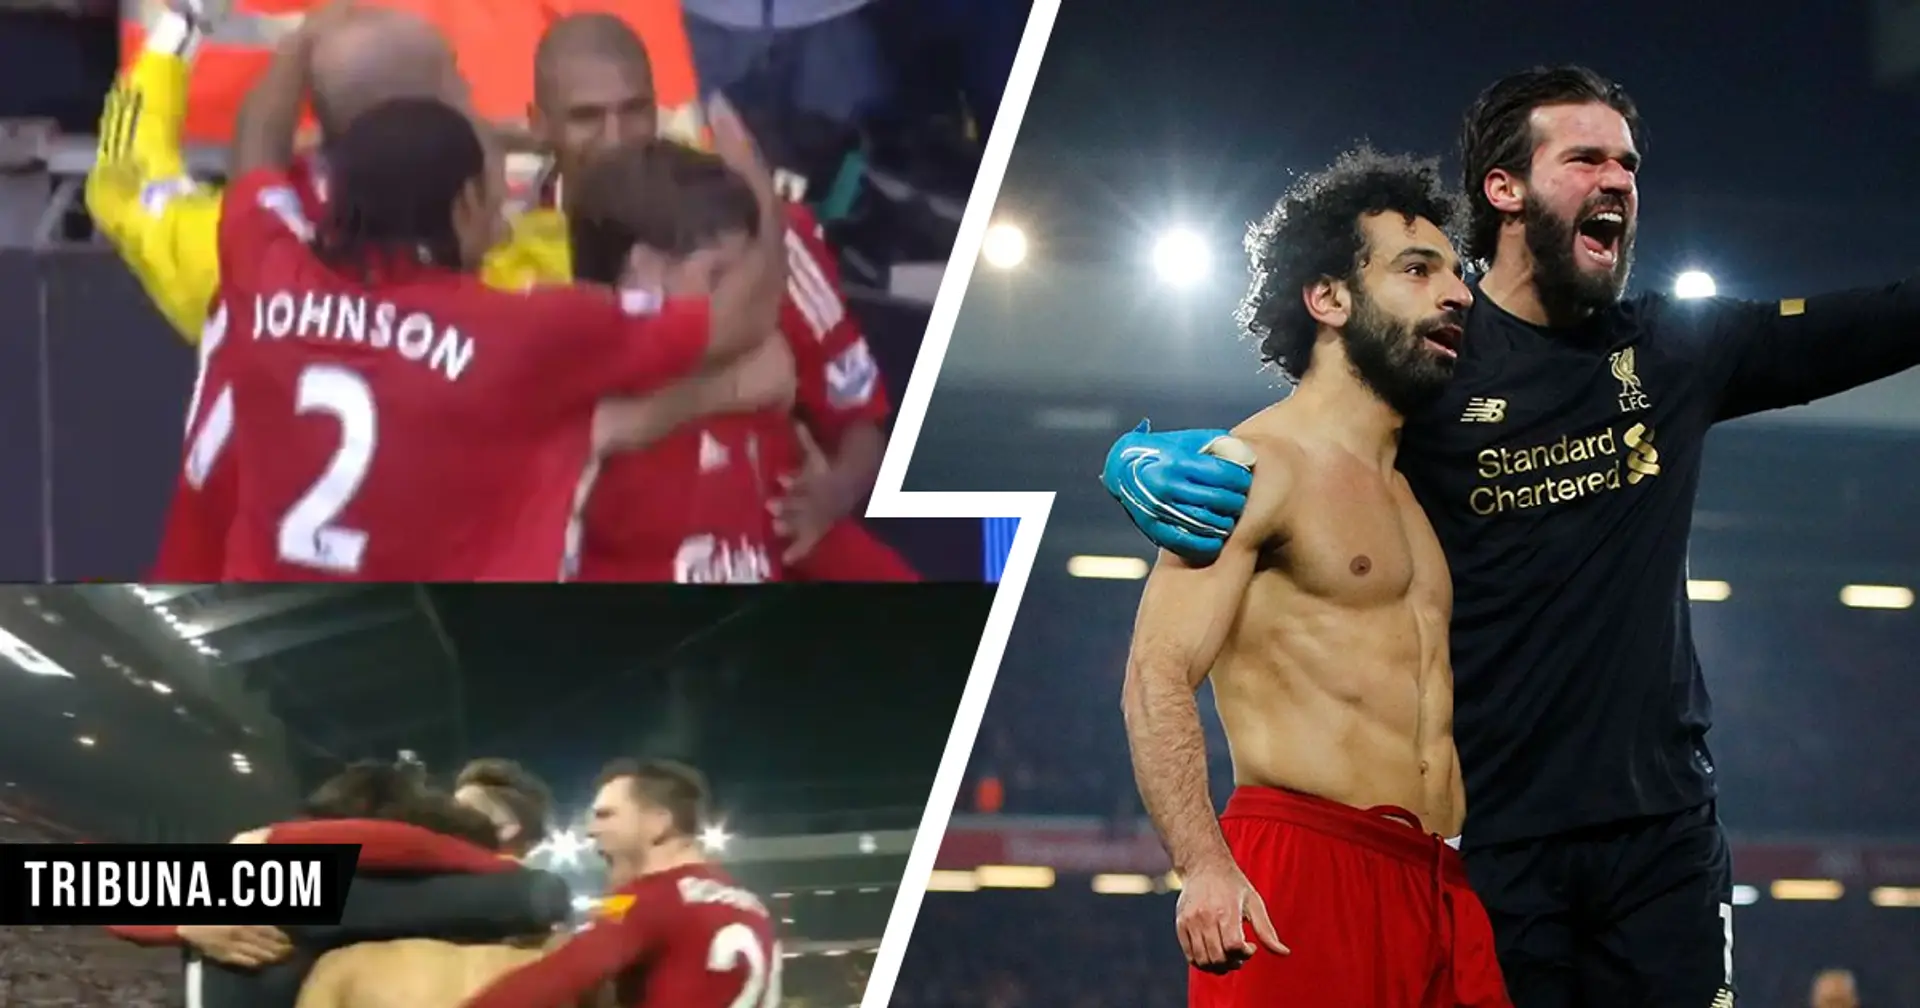 Reliving iconic goals and goalkeeper celebrations against Man United (video)